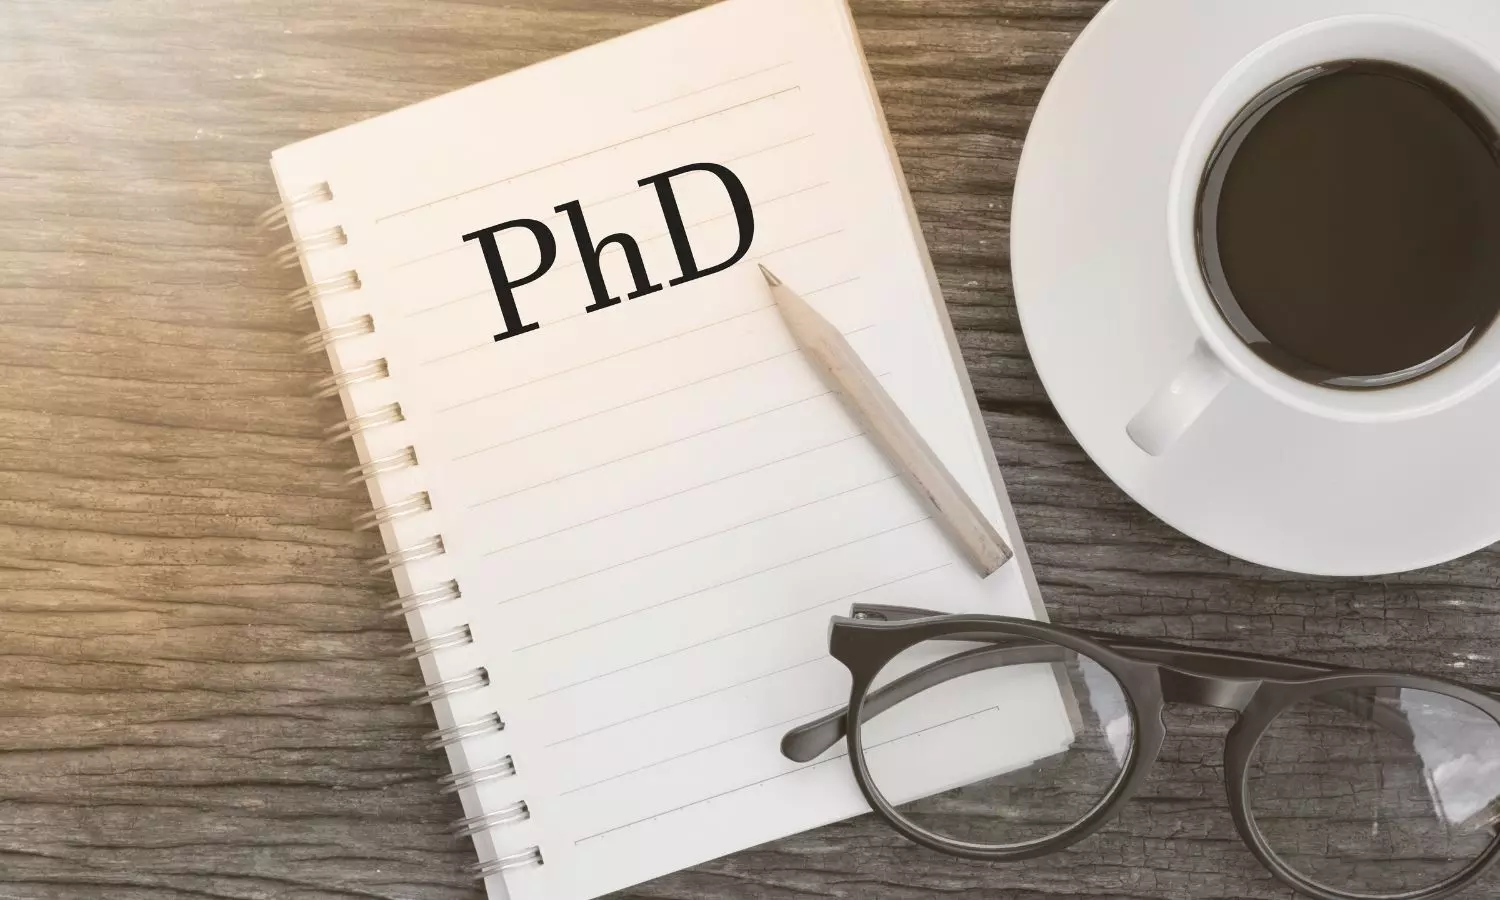 AIIMS Delhi Invites Online Applications For PhD Program July 2022, check out details